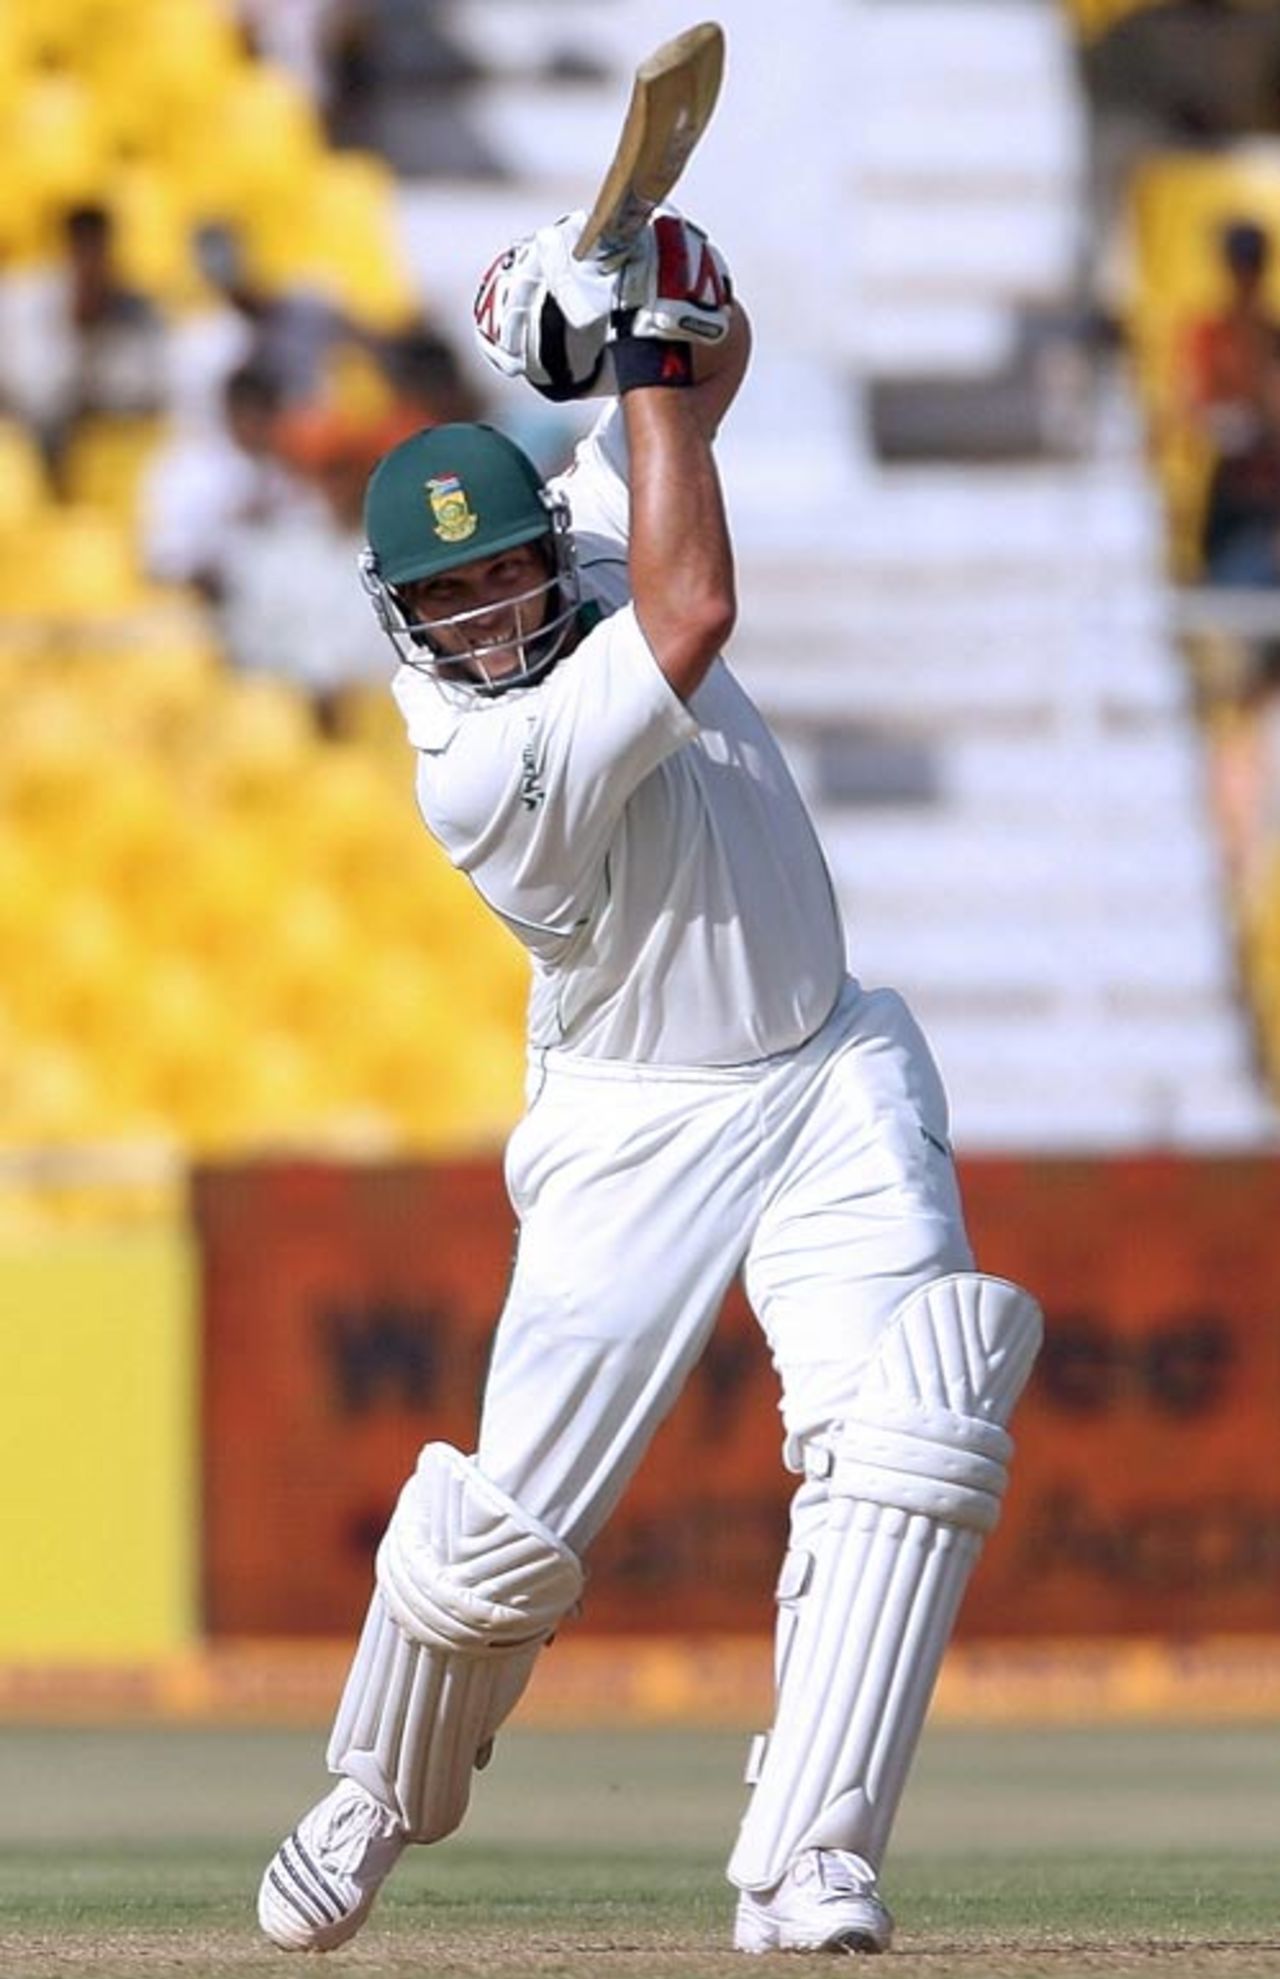 Jacques Kallis drives on his way to an unbeaten 60, India v South Africa, 2nd Test, Ahmedabad, 1st day, April 3, 2008